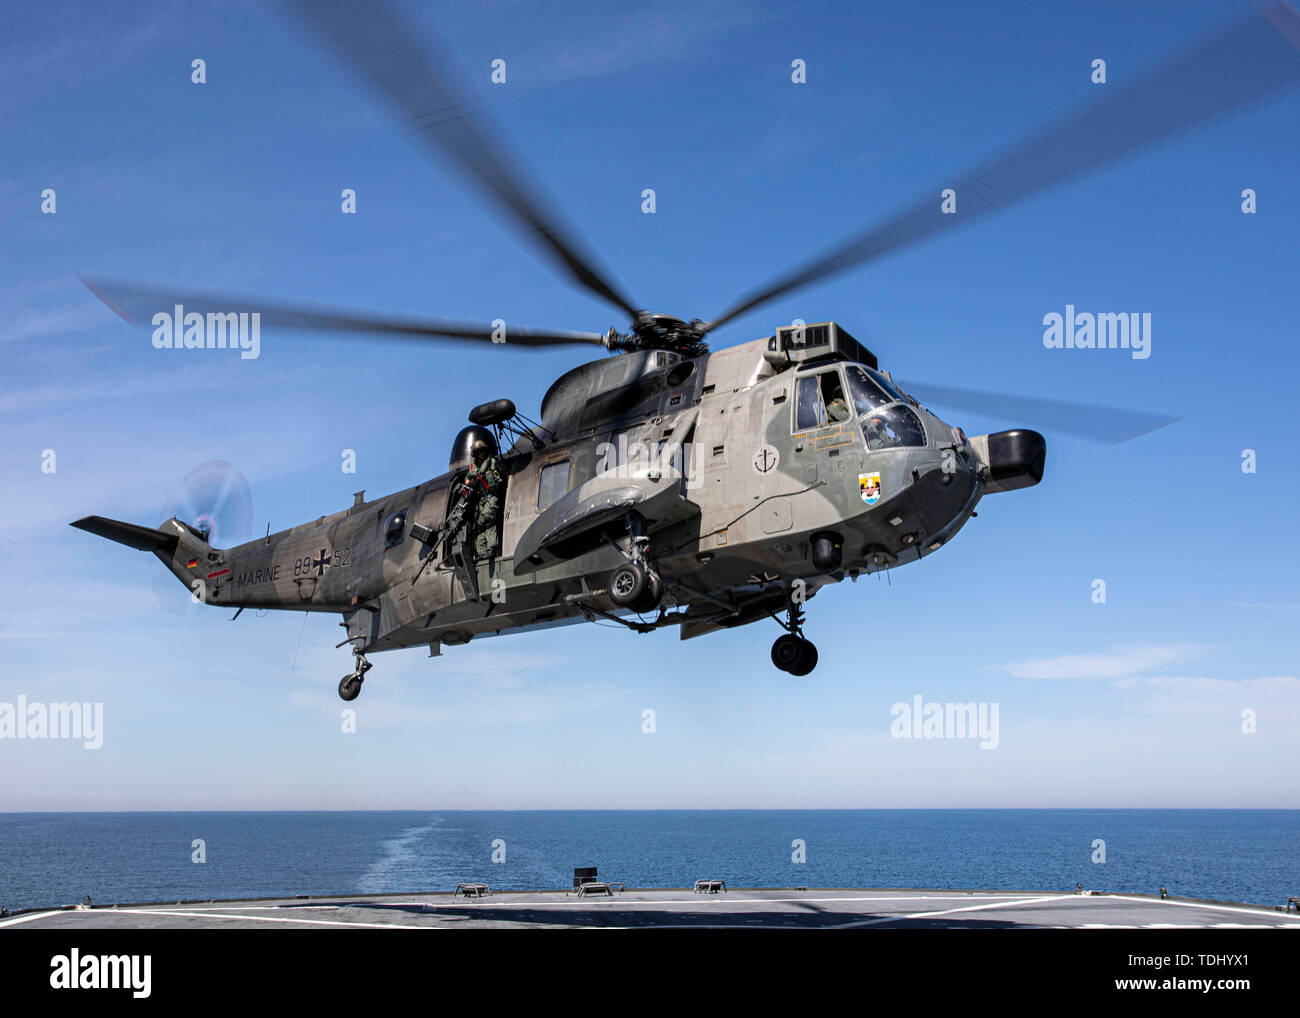 190615-N-EI510-0077 BALTIC SEA (June 15, 2019) A German Westland Sikorsy WS-61 Sea King search and rescue helicopter departs the Blue Ridge class command and control ship USS Mount Whitney (LCC 20) during exercise Baltic Operations (BALTOPS) 2019. BALTOPS is the premier annual maritime-focused exercise in the Baltic Region, marking the 47th year of one of the largest exercises in Northern Europe enhancing flexibility and interoperability among allied and partnered nations.  (U.S. Navy Photo by Mass Communication Specialist 2nd Class Scott Barnes) Stock Photo